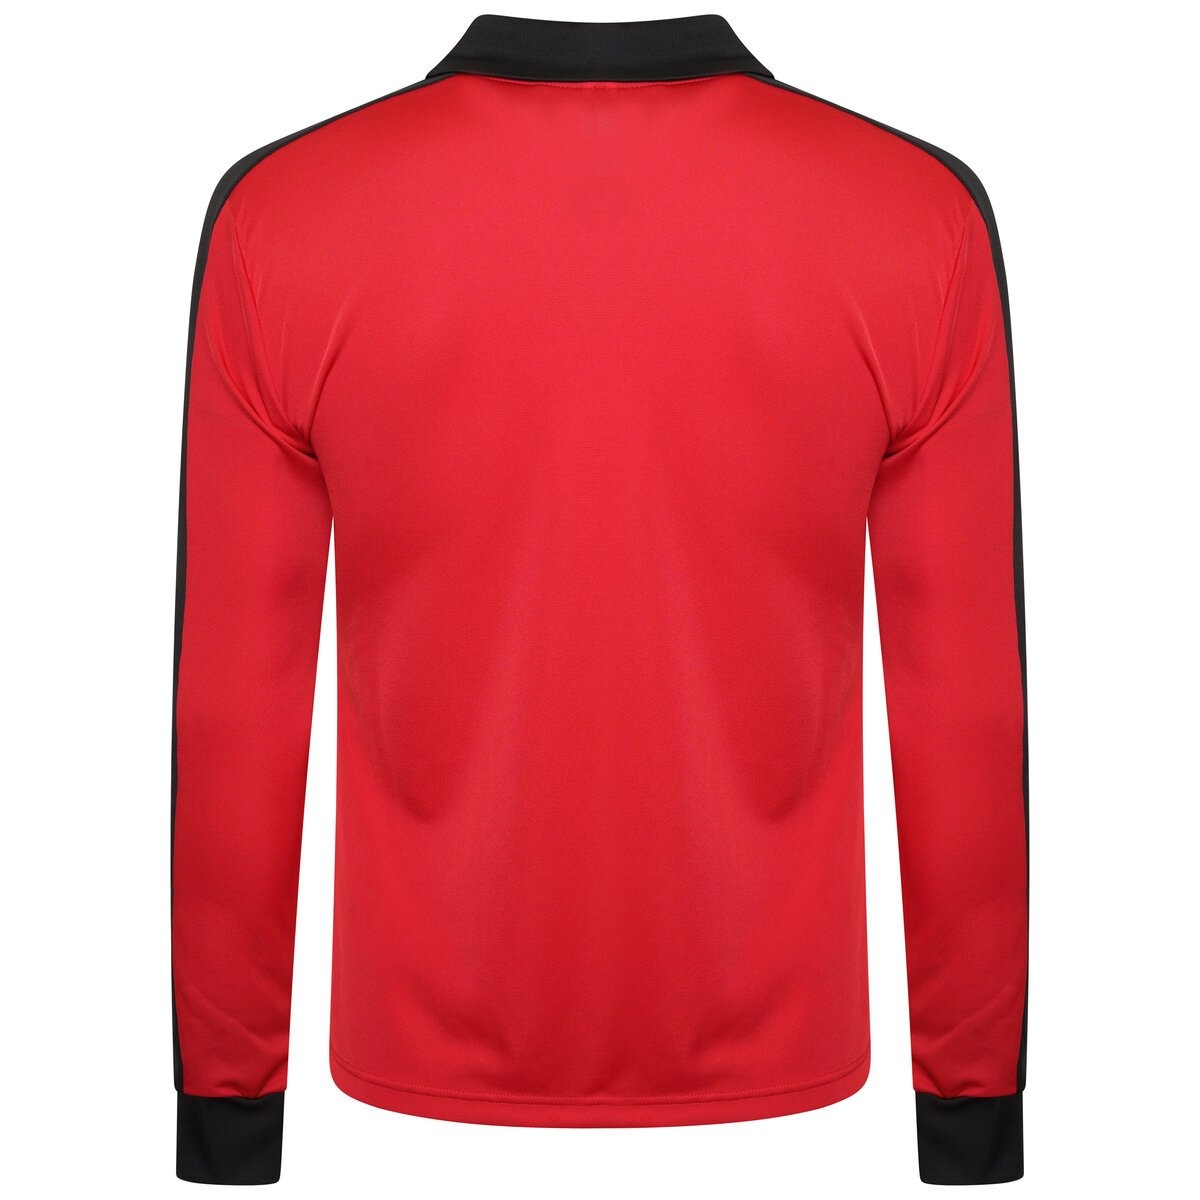 Home Jersey Shirt in Red/black - 2